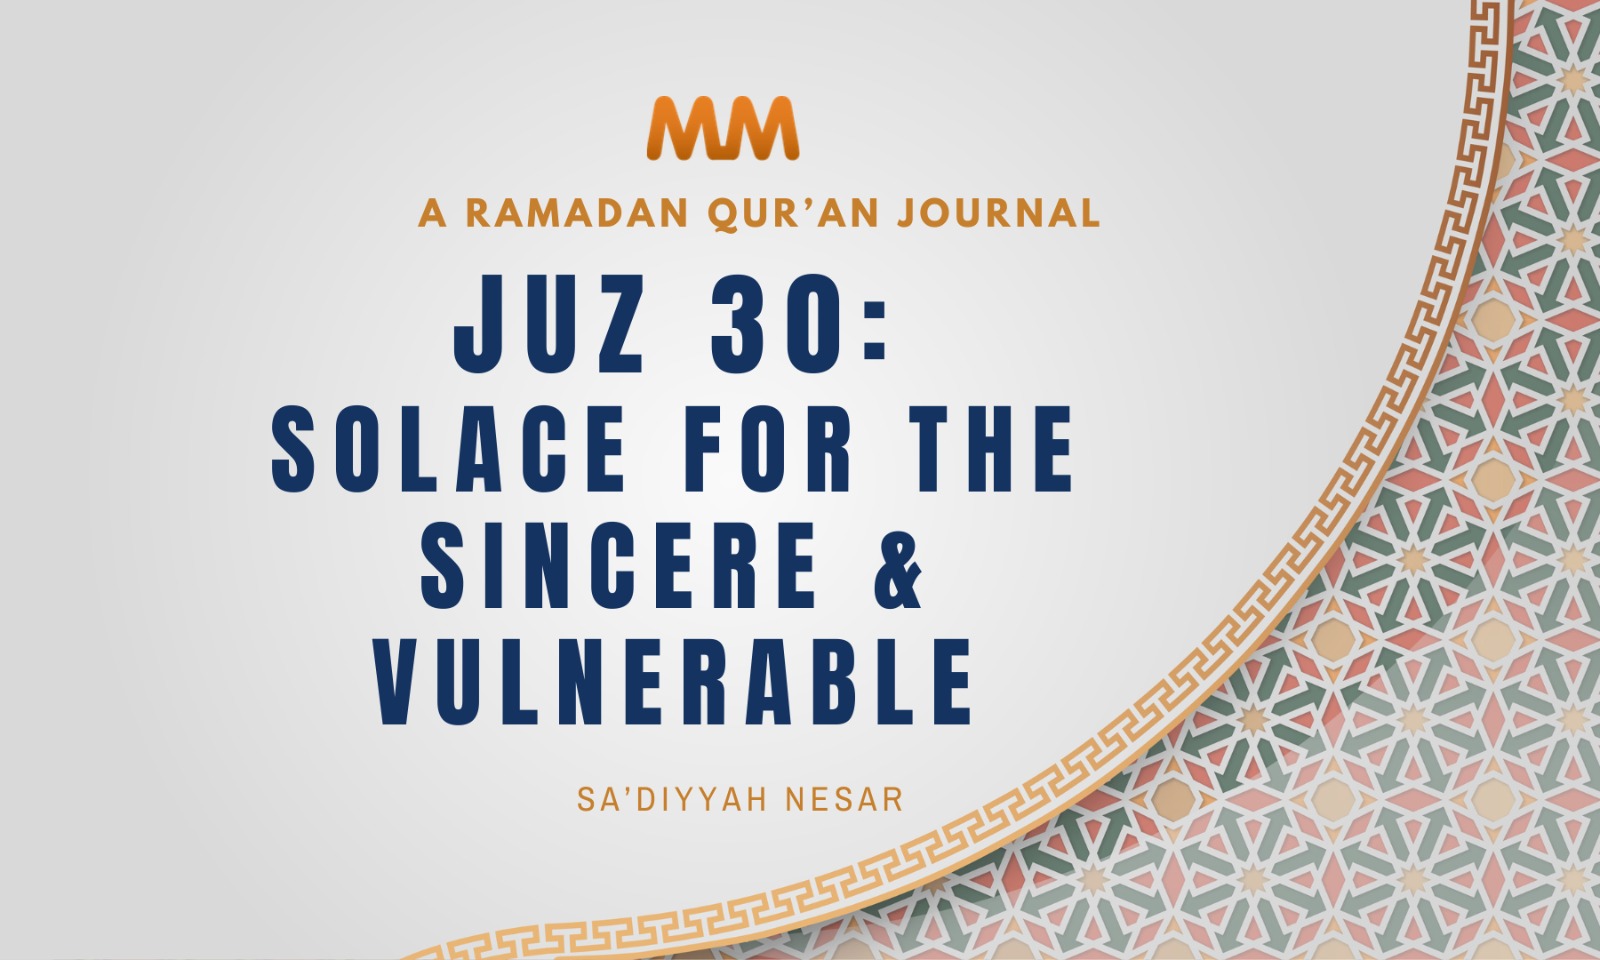 A Ramadan Quran Journal: A MuslimMatters Series – [Juz 30] Solace For The Sincere And Vulnerable